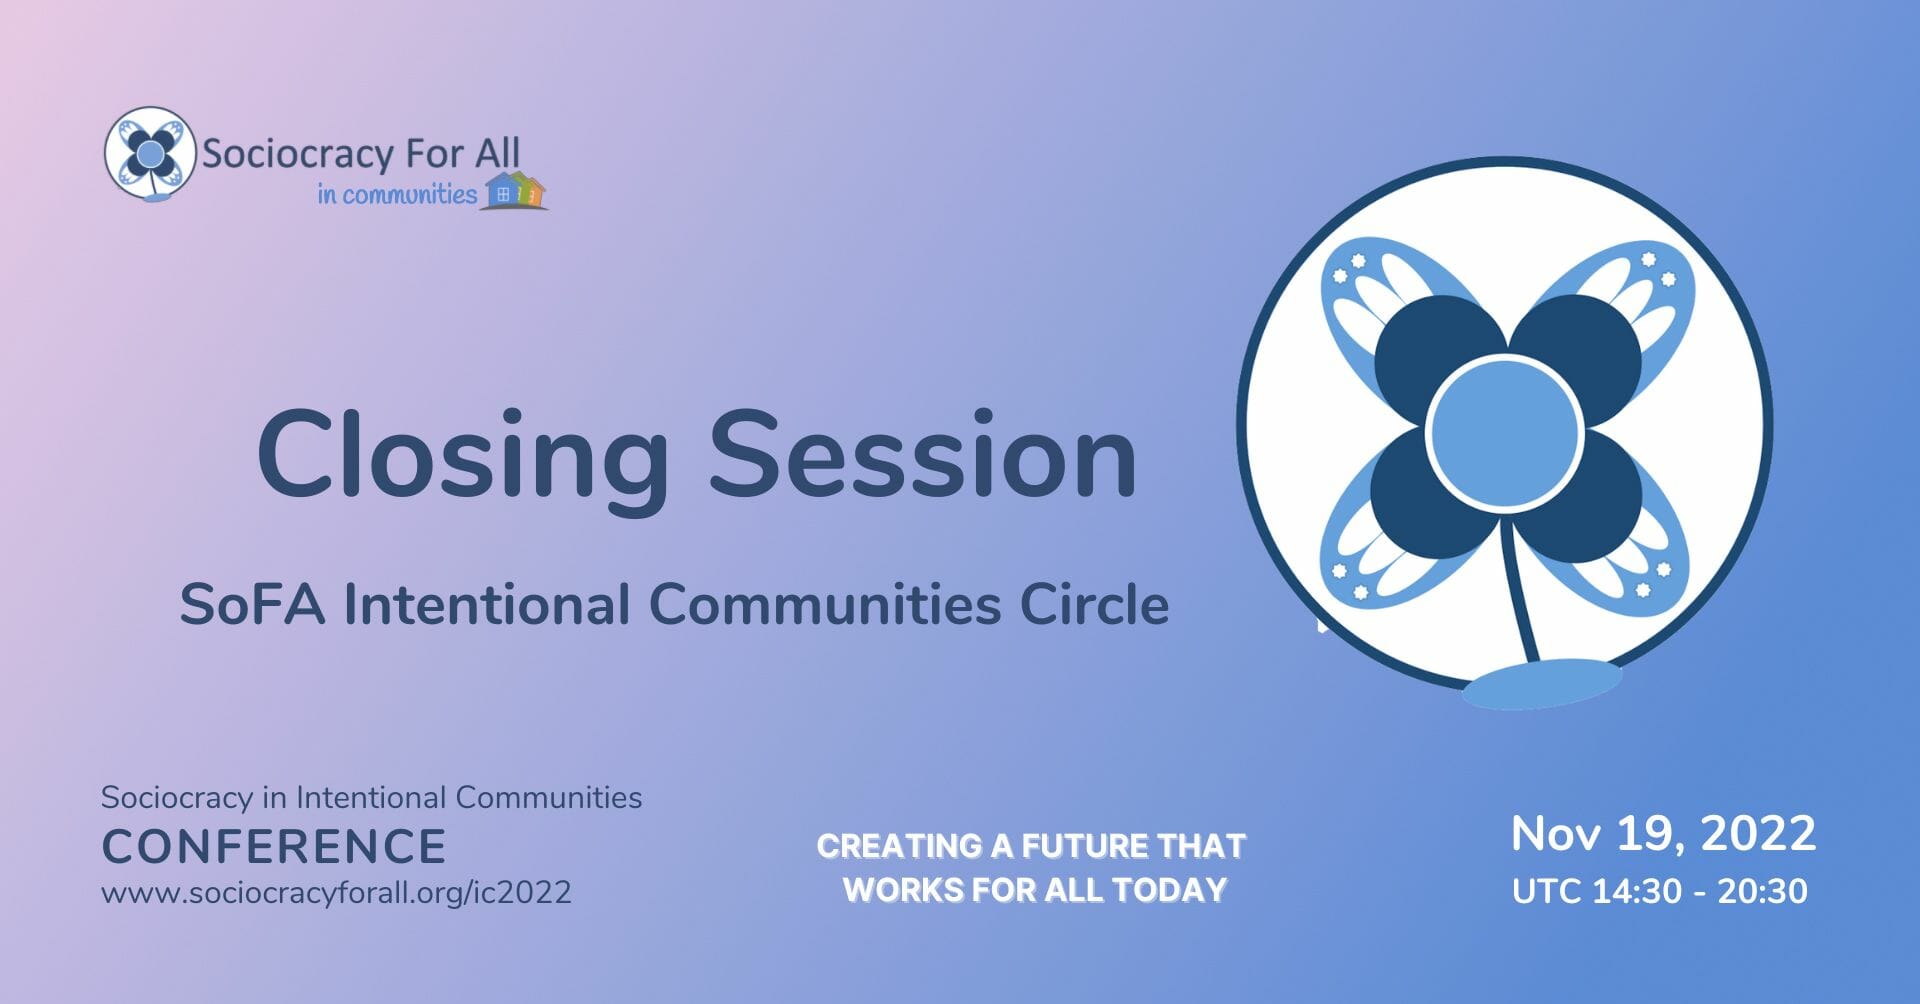 closing session sociocracy in intentional communities conference 2022 - - Sociocracy For All